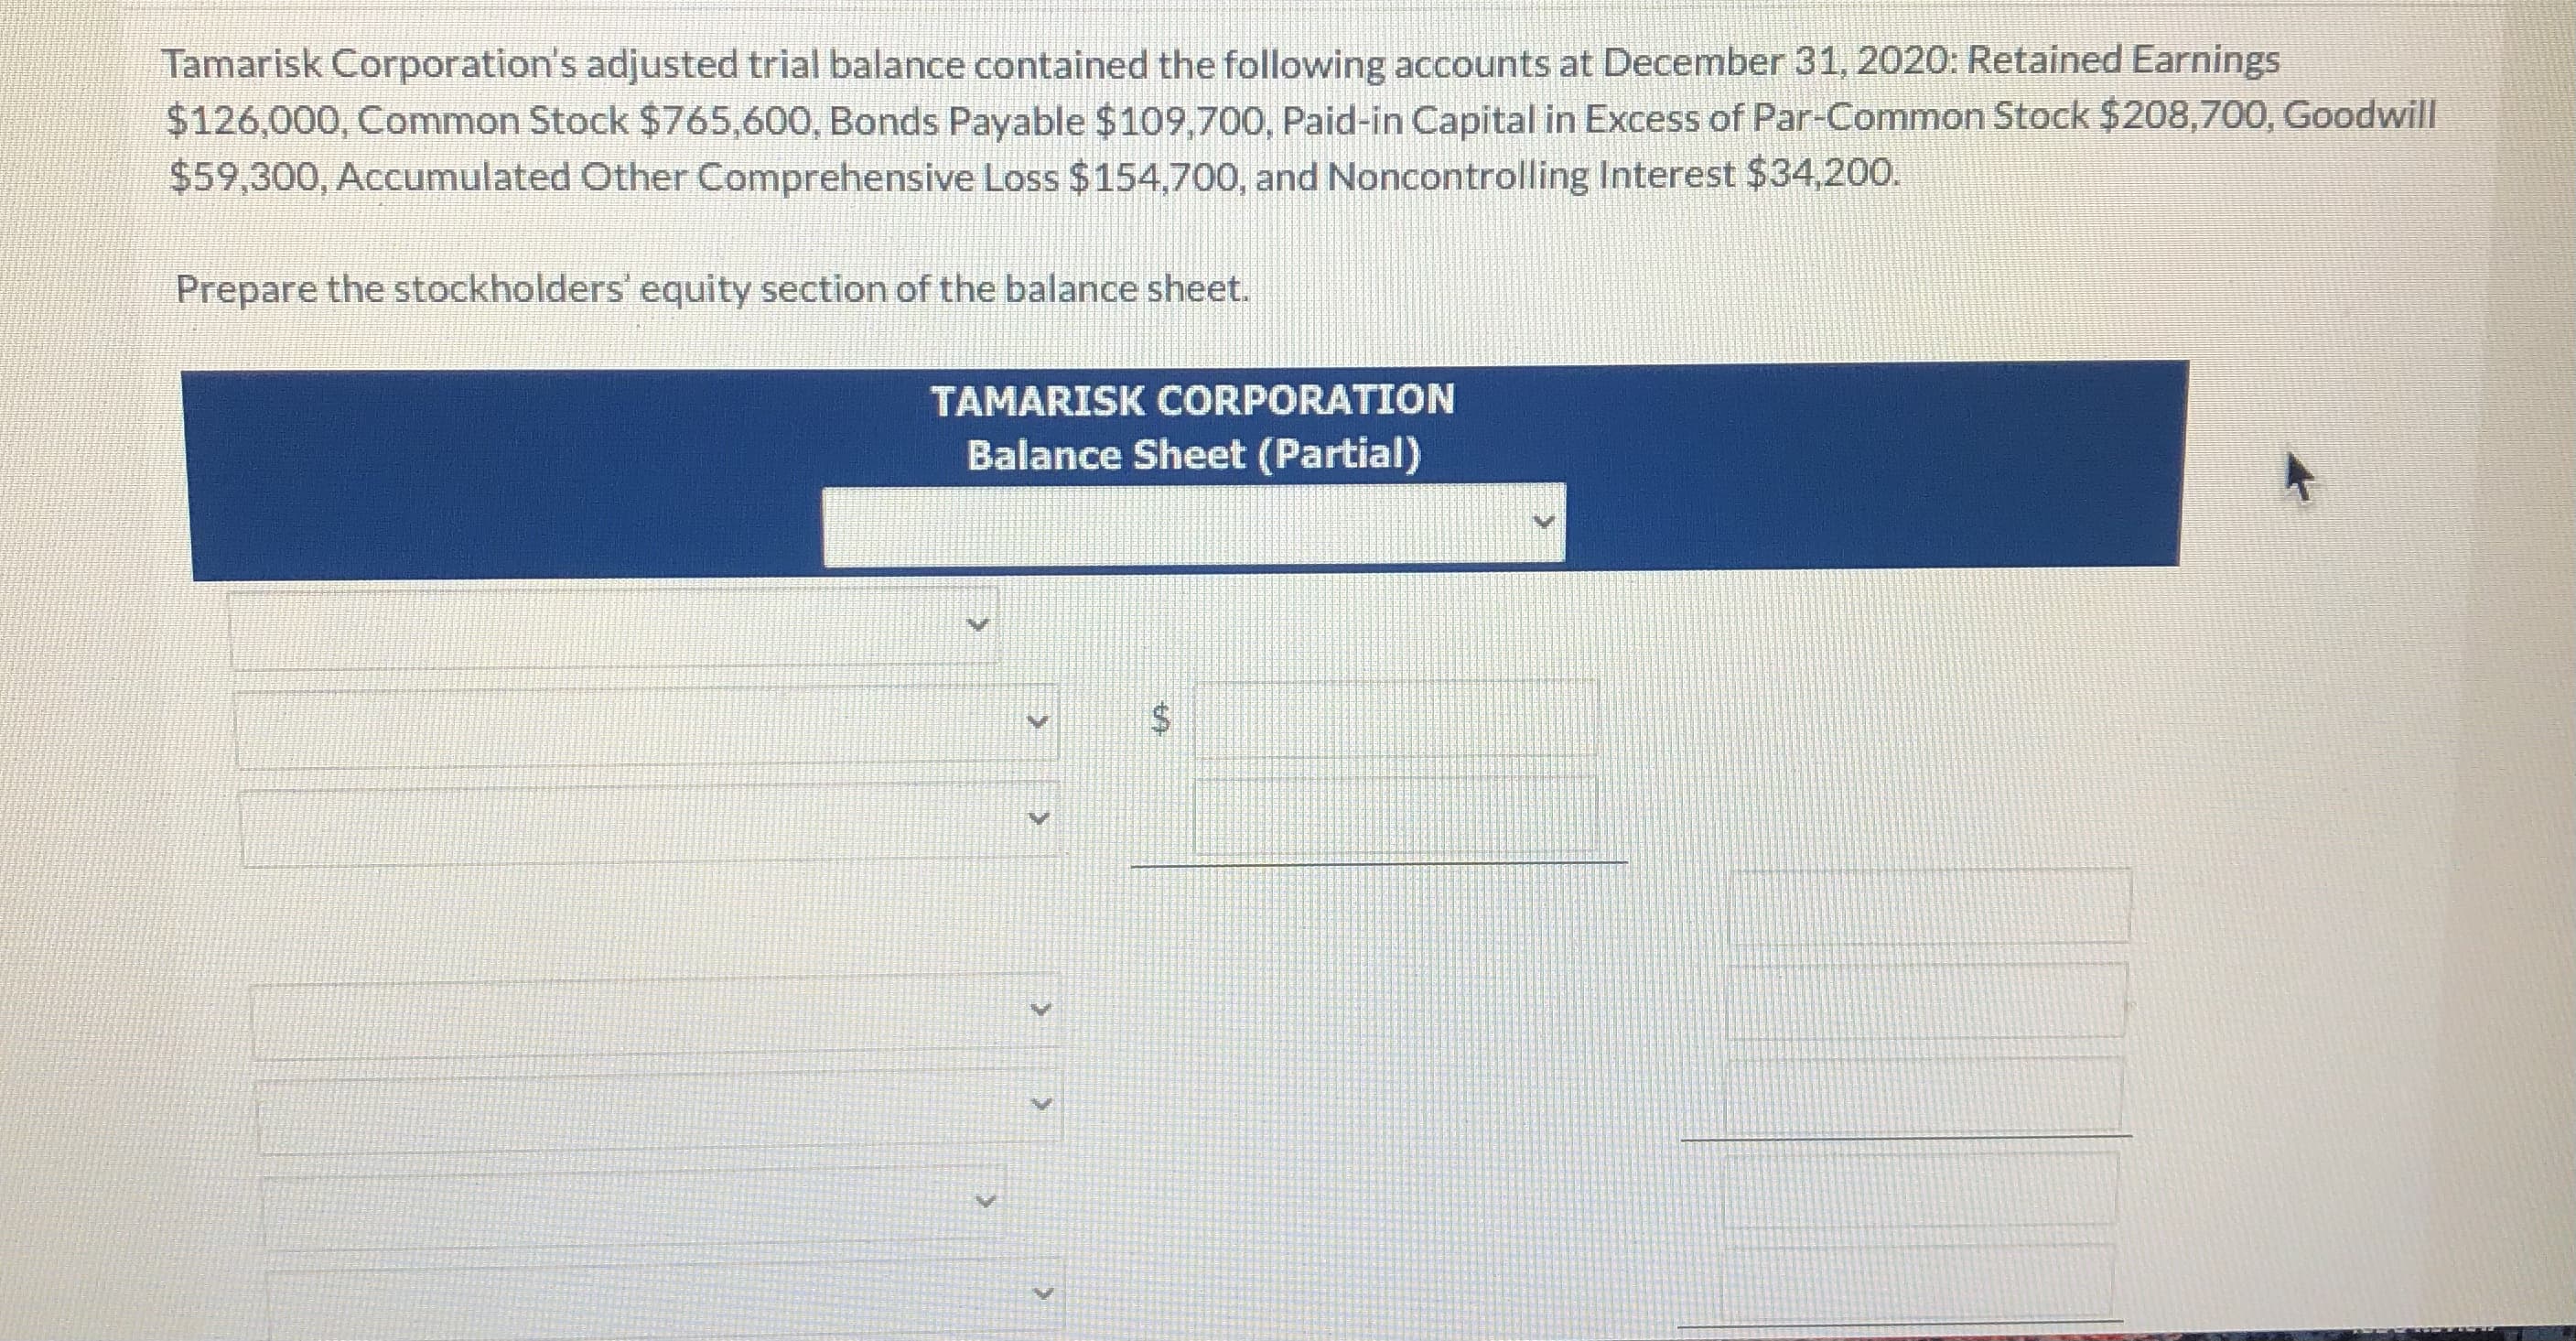 Tamarisk Corporation's adjusted trial balance contained the following accounts at December 31, 2020: Retained Earnings
$126,000, Common Stock $765,600, Bonds Payable $109,700, Paid-in Capital in Excess of Par-Common Stock $208,700, Goodwill
$59,300, Accumulated Other Comprehensive Loss $154,700, and Noncontrolling Interest $34,200.
Prepare the stockholders' equity section of the balance sheet.
